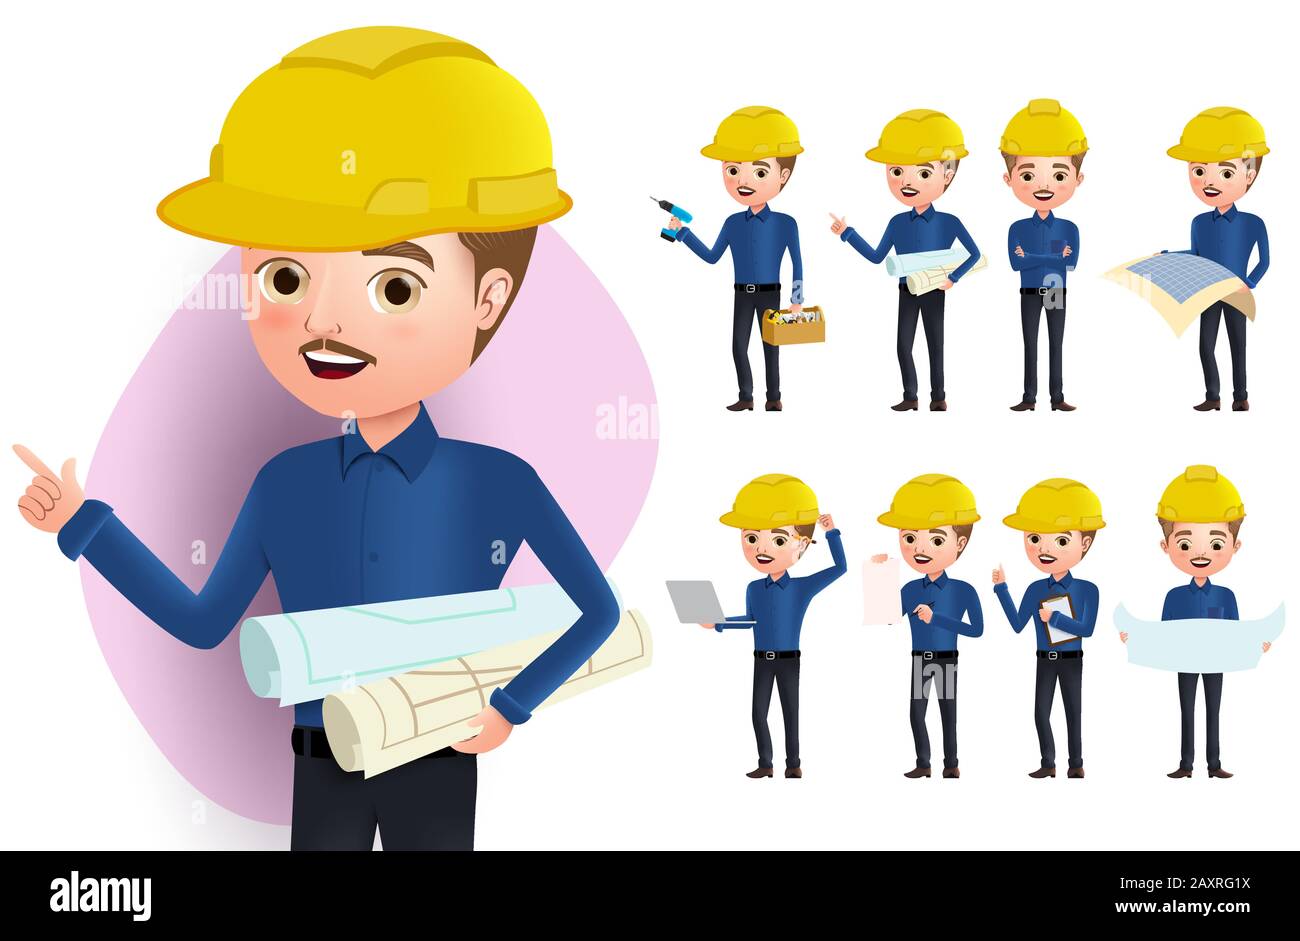 Engineer vector characters set. Businessman or professional engineer character with yellow helmet in standing, talking, reading and holding blueprint. Stock Vector